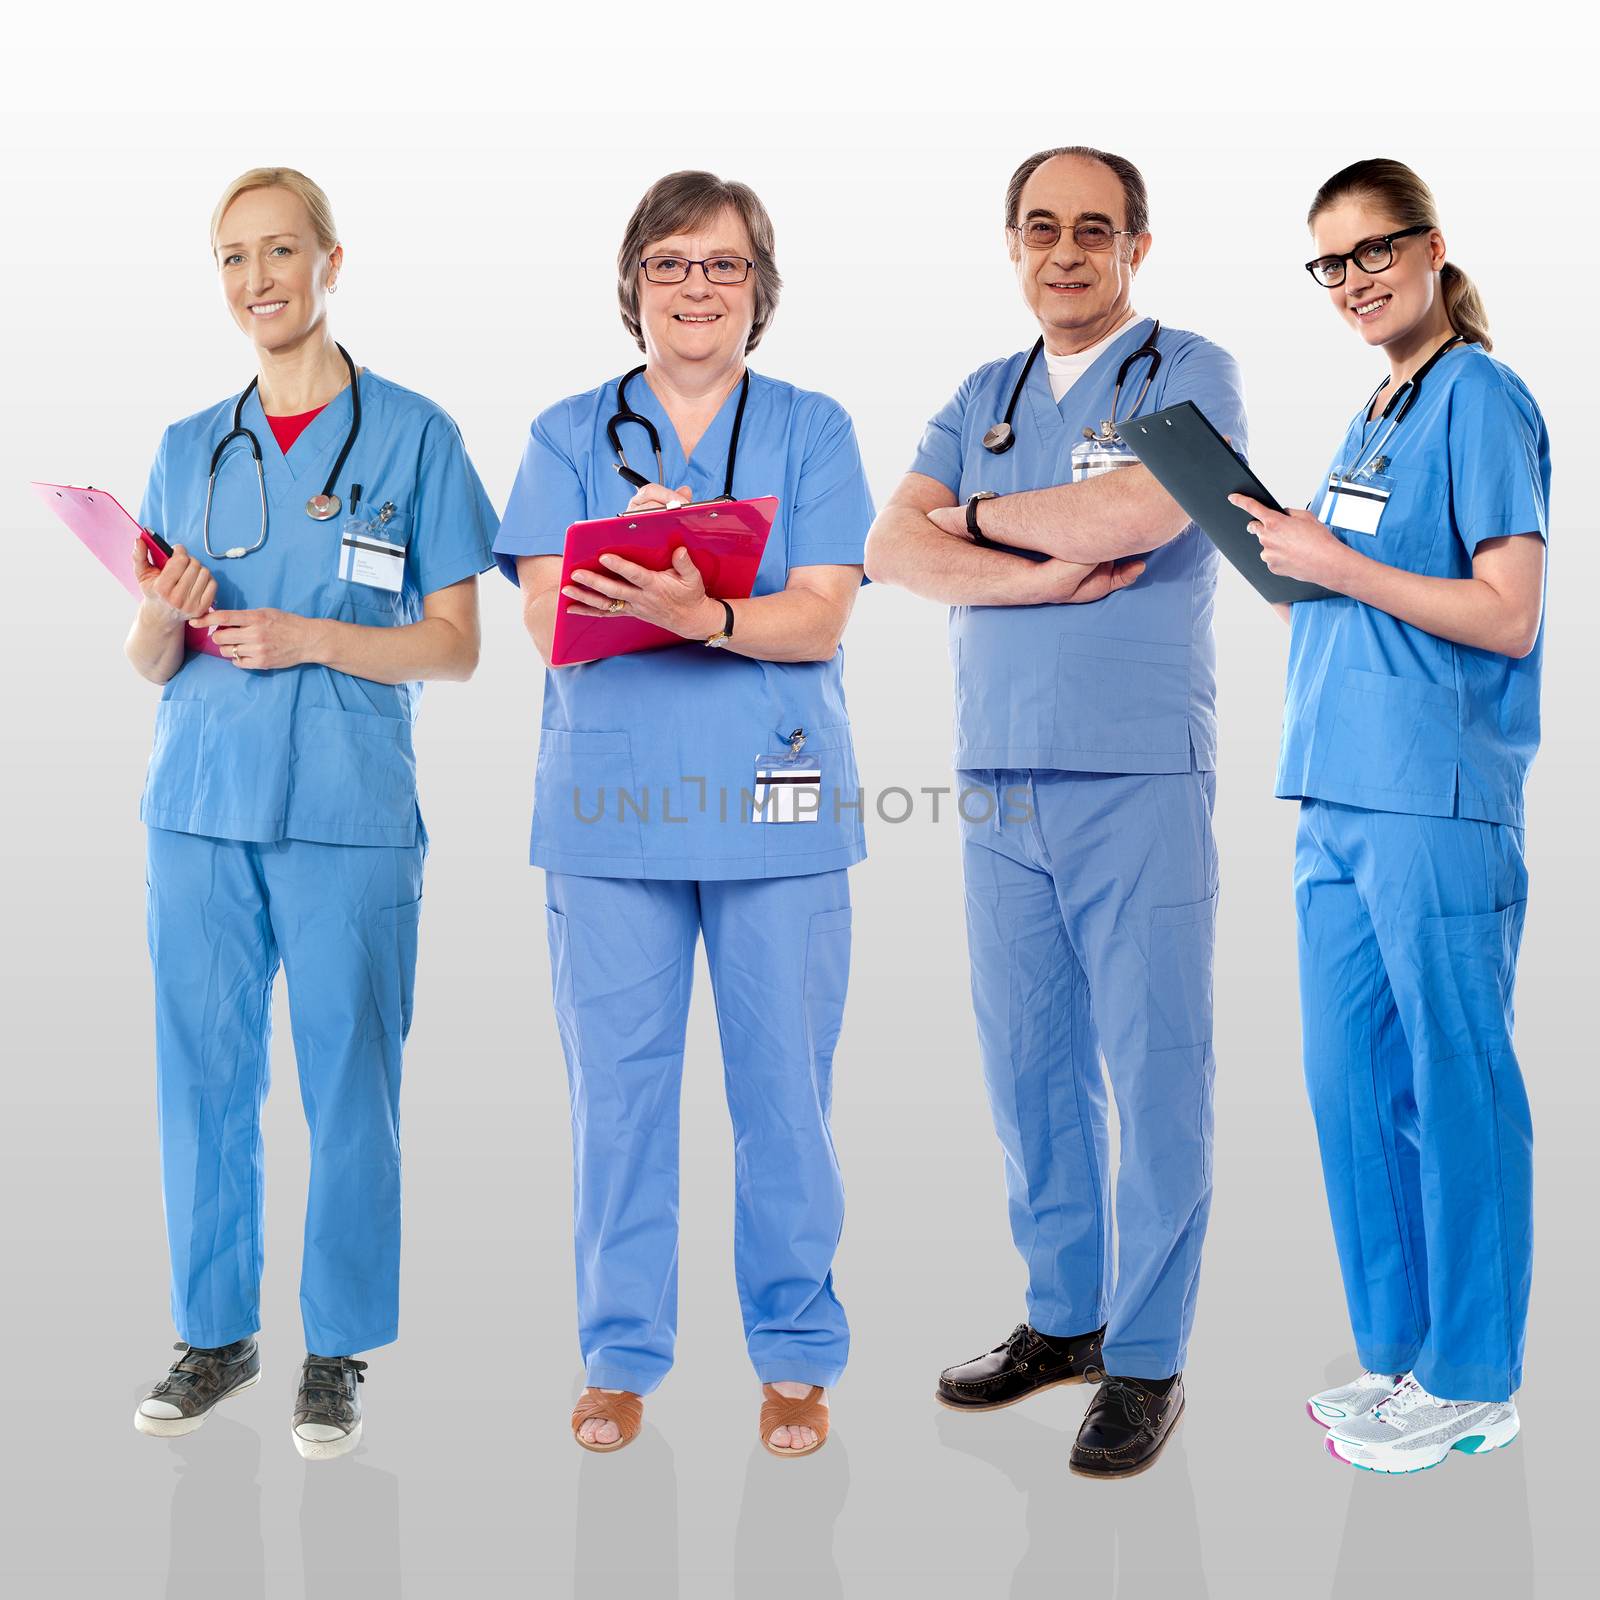 Senior team of doctors posing with a smile by stockyimages